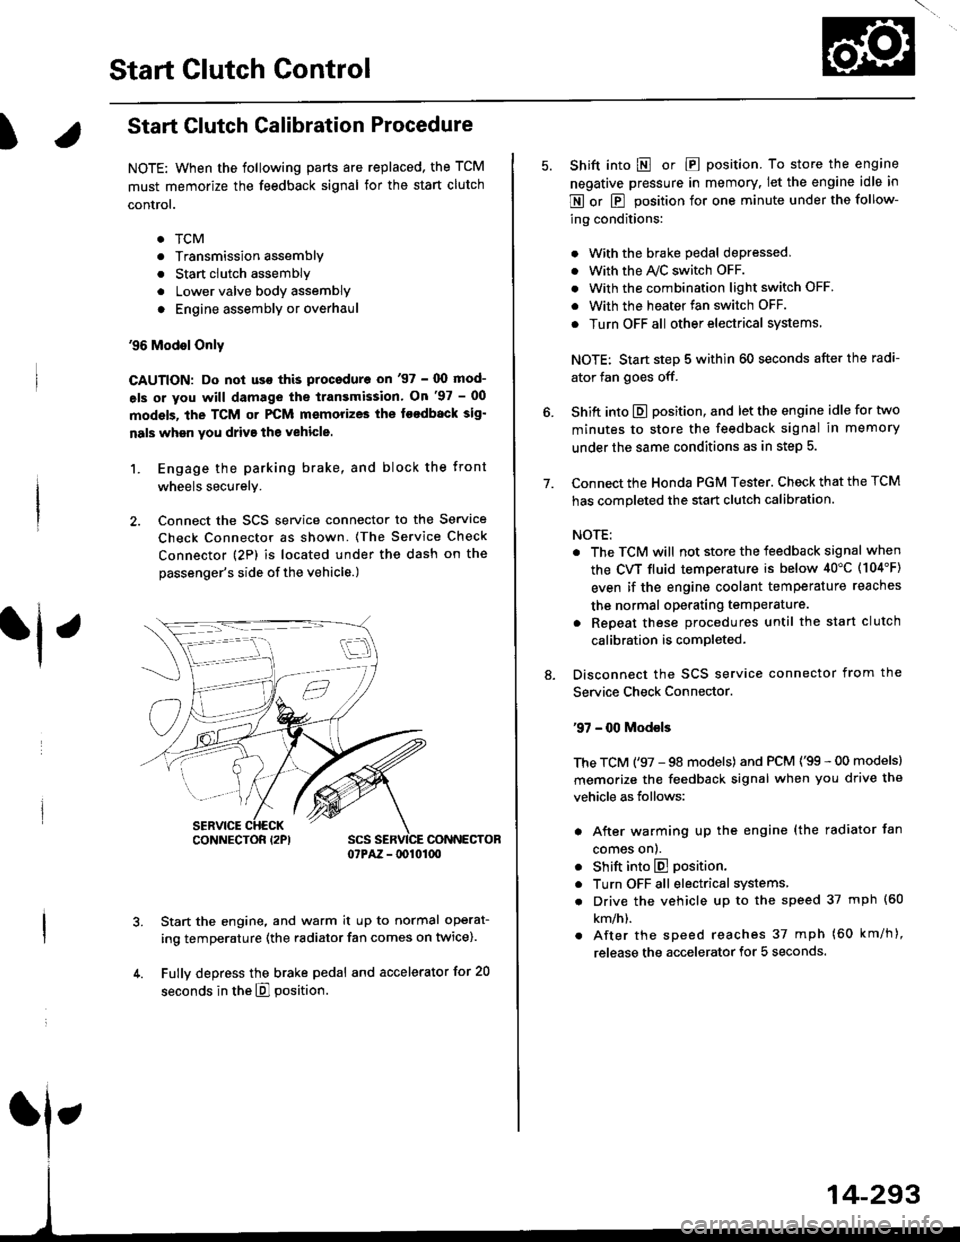 HONDA CIVIC 1997 6.G Owners Manual Start Clutch Control@
T
Start Clutch Calibration Procedure
NOTE: When the following parts are replaced, the TCM
must memorize the feedback signal for the start clutch
control.
. TCM
. Transmissionasse